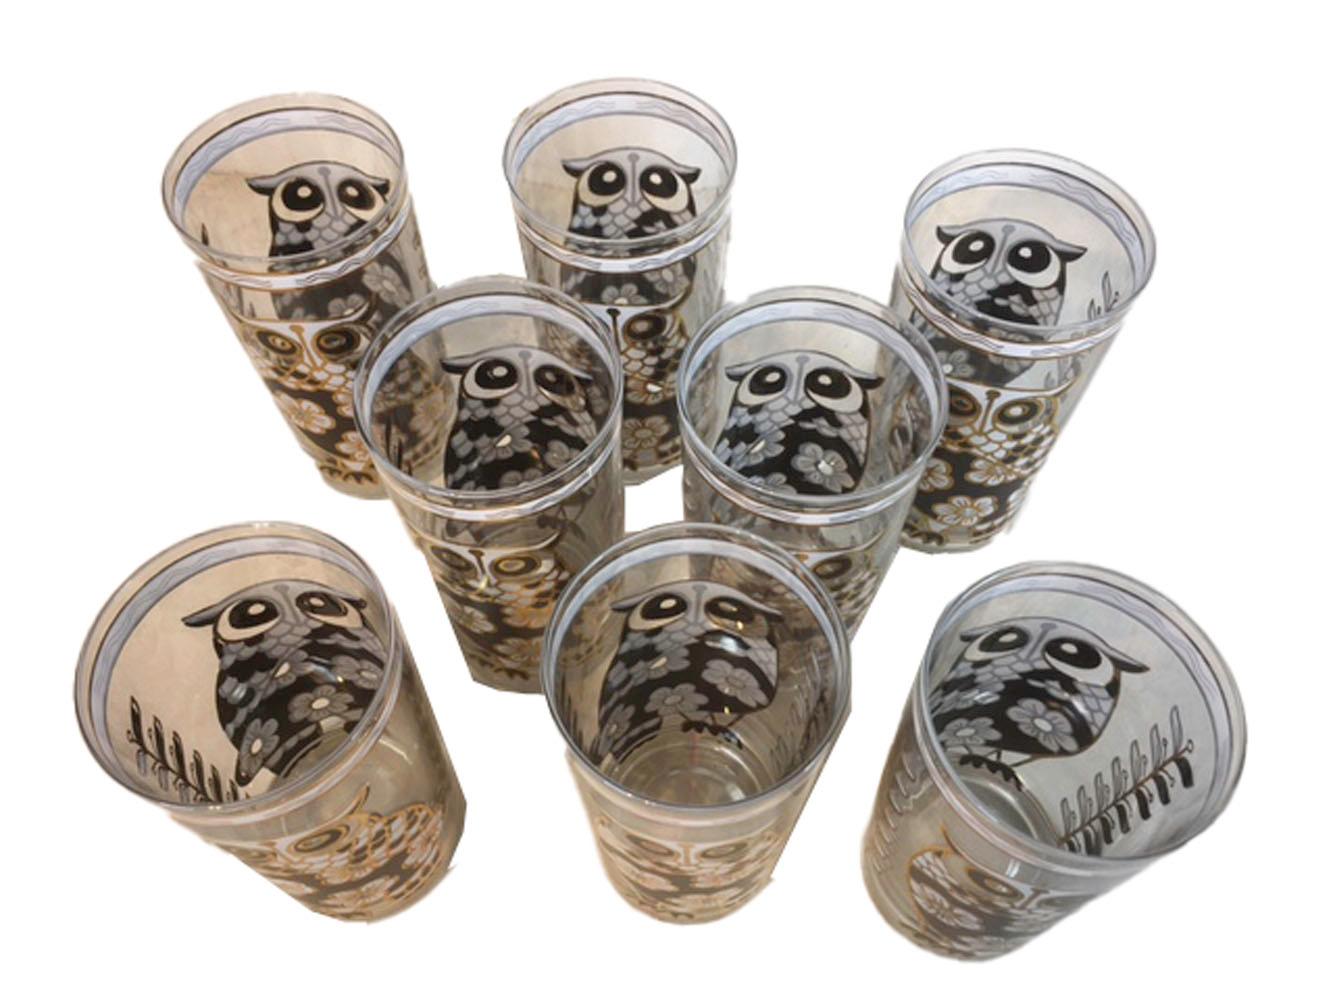 Set of eight mid-20th century highball glasses by Cera Glassware having large stylized owls and flowers in black and white enamel with gold trim. All in excellent condition.